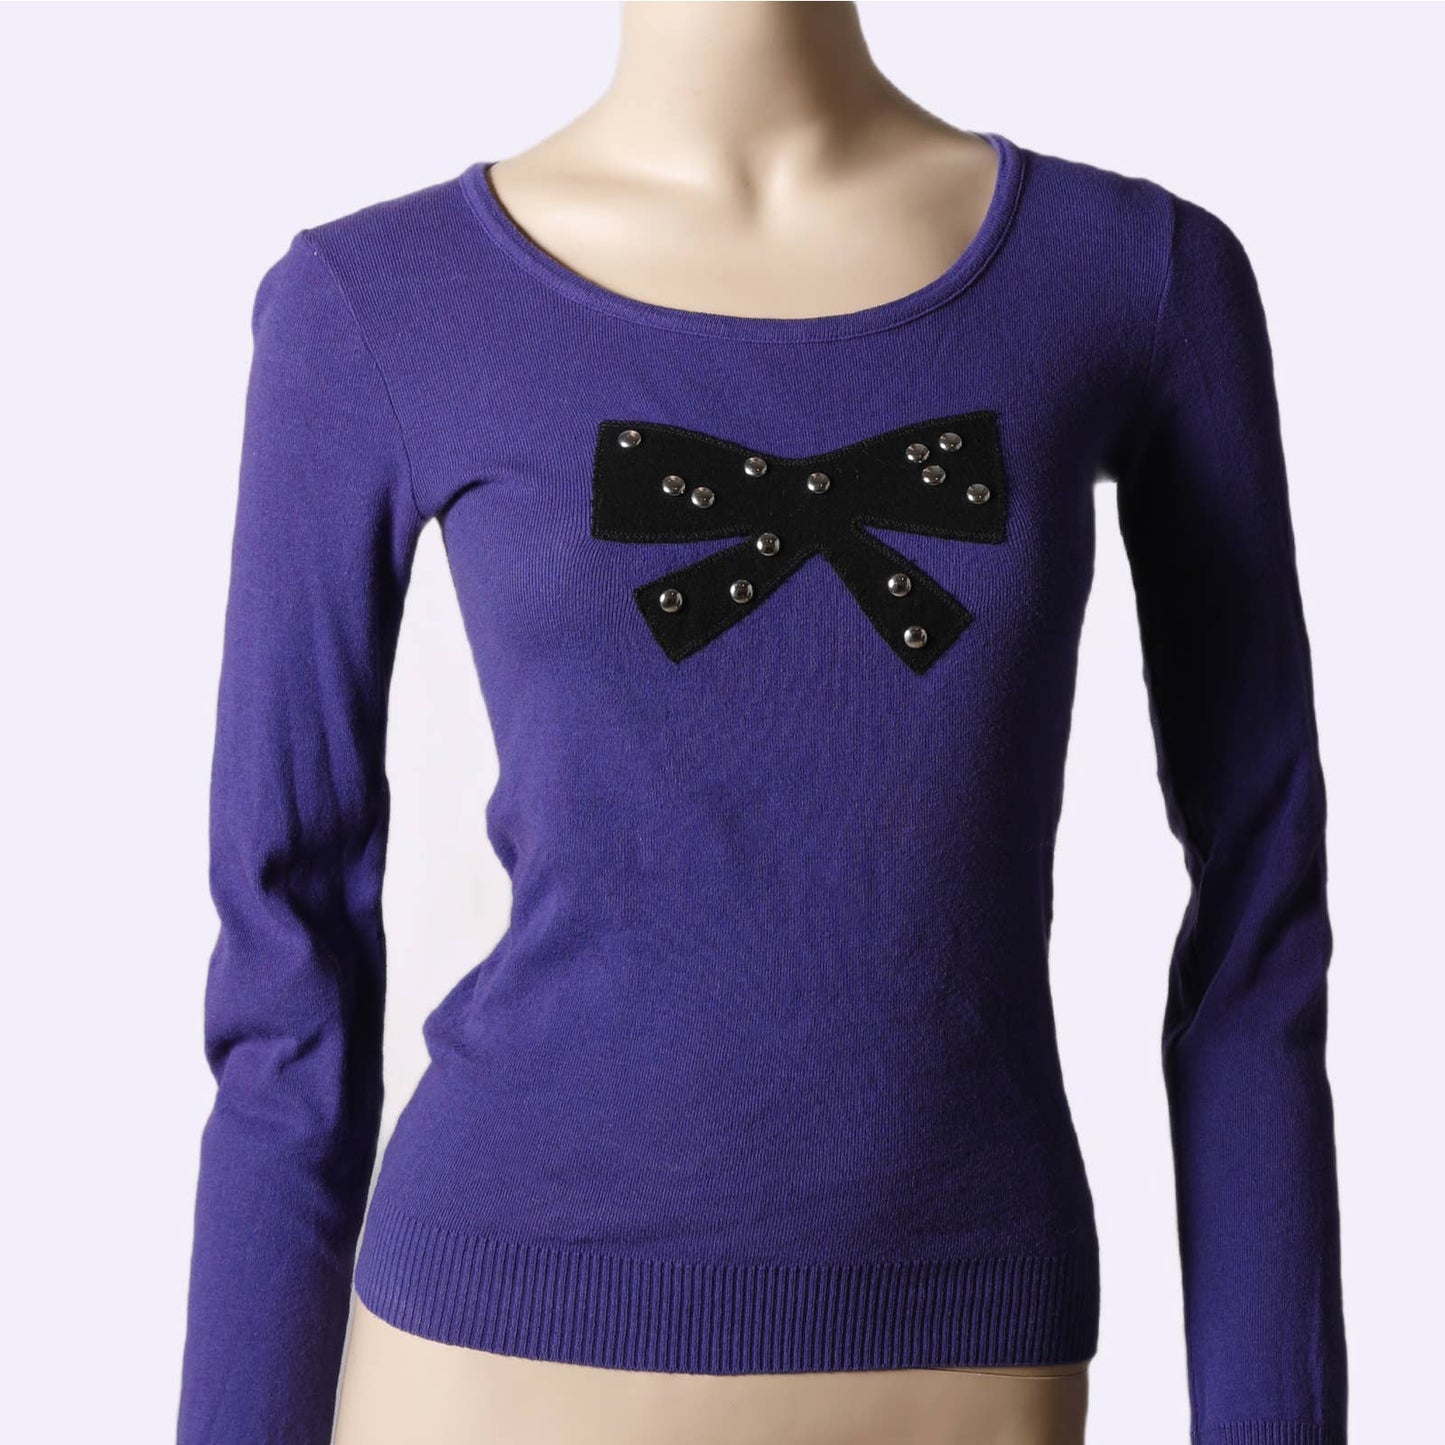 SONIA BY SONIA RYKIEL Violet with Black Pearled Bow Long Sleeve Sweater